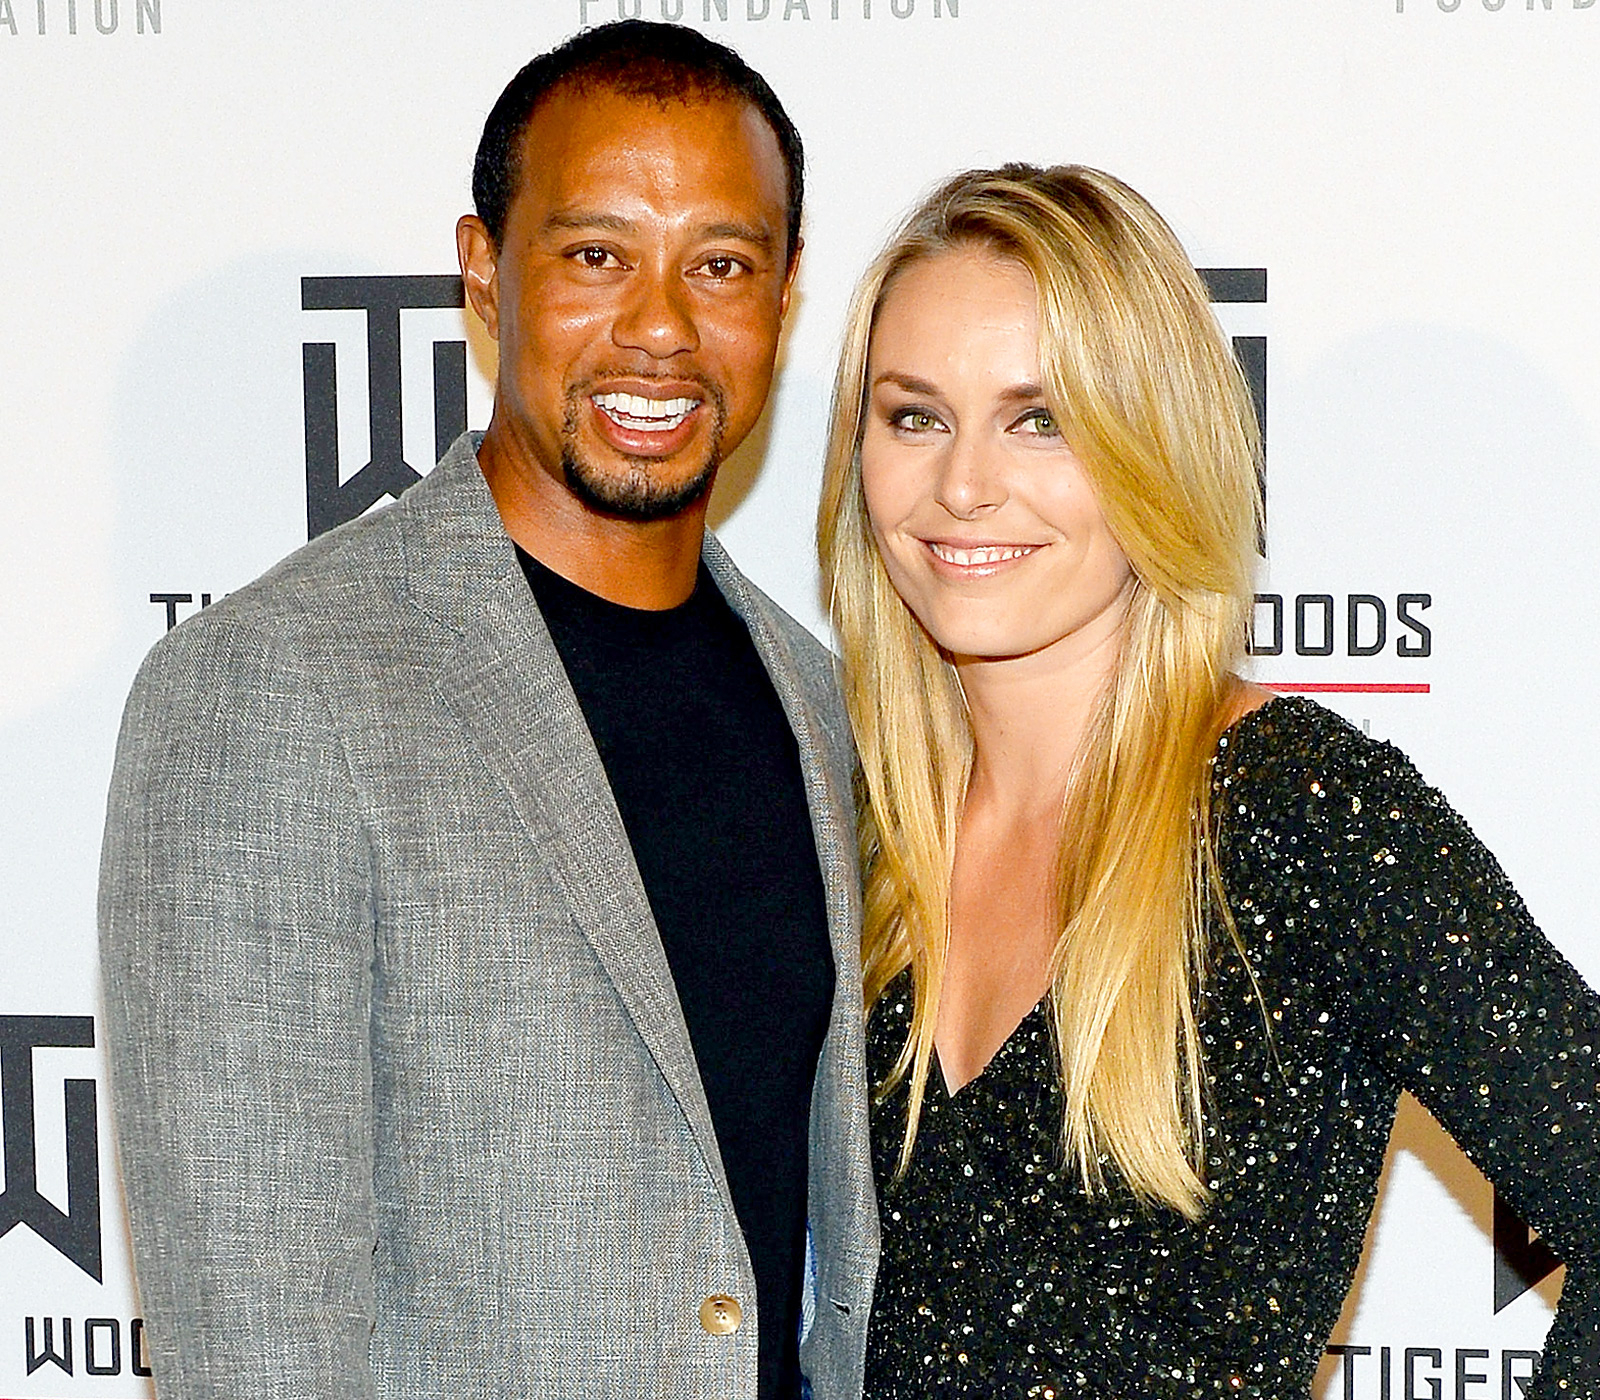 Lindsey Vonn Responds to Leaked Nude Photos of Her and Tiger Woods photo